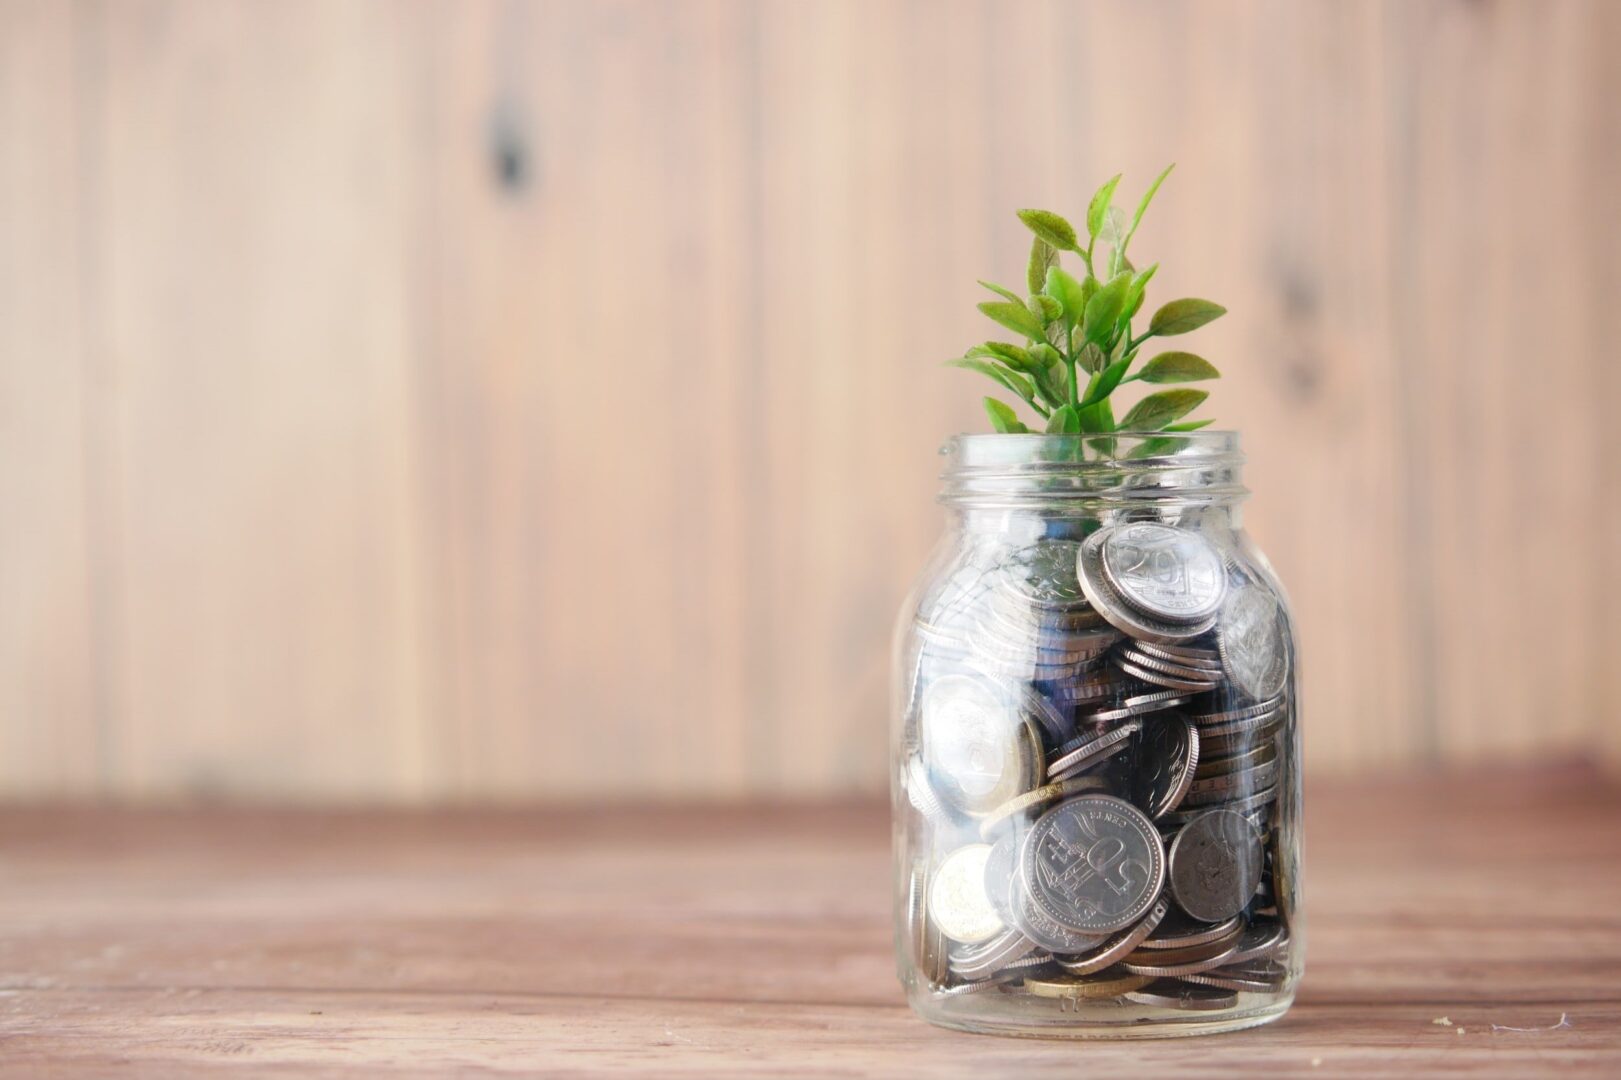 A glass jar with coins and a plant in it.